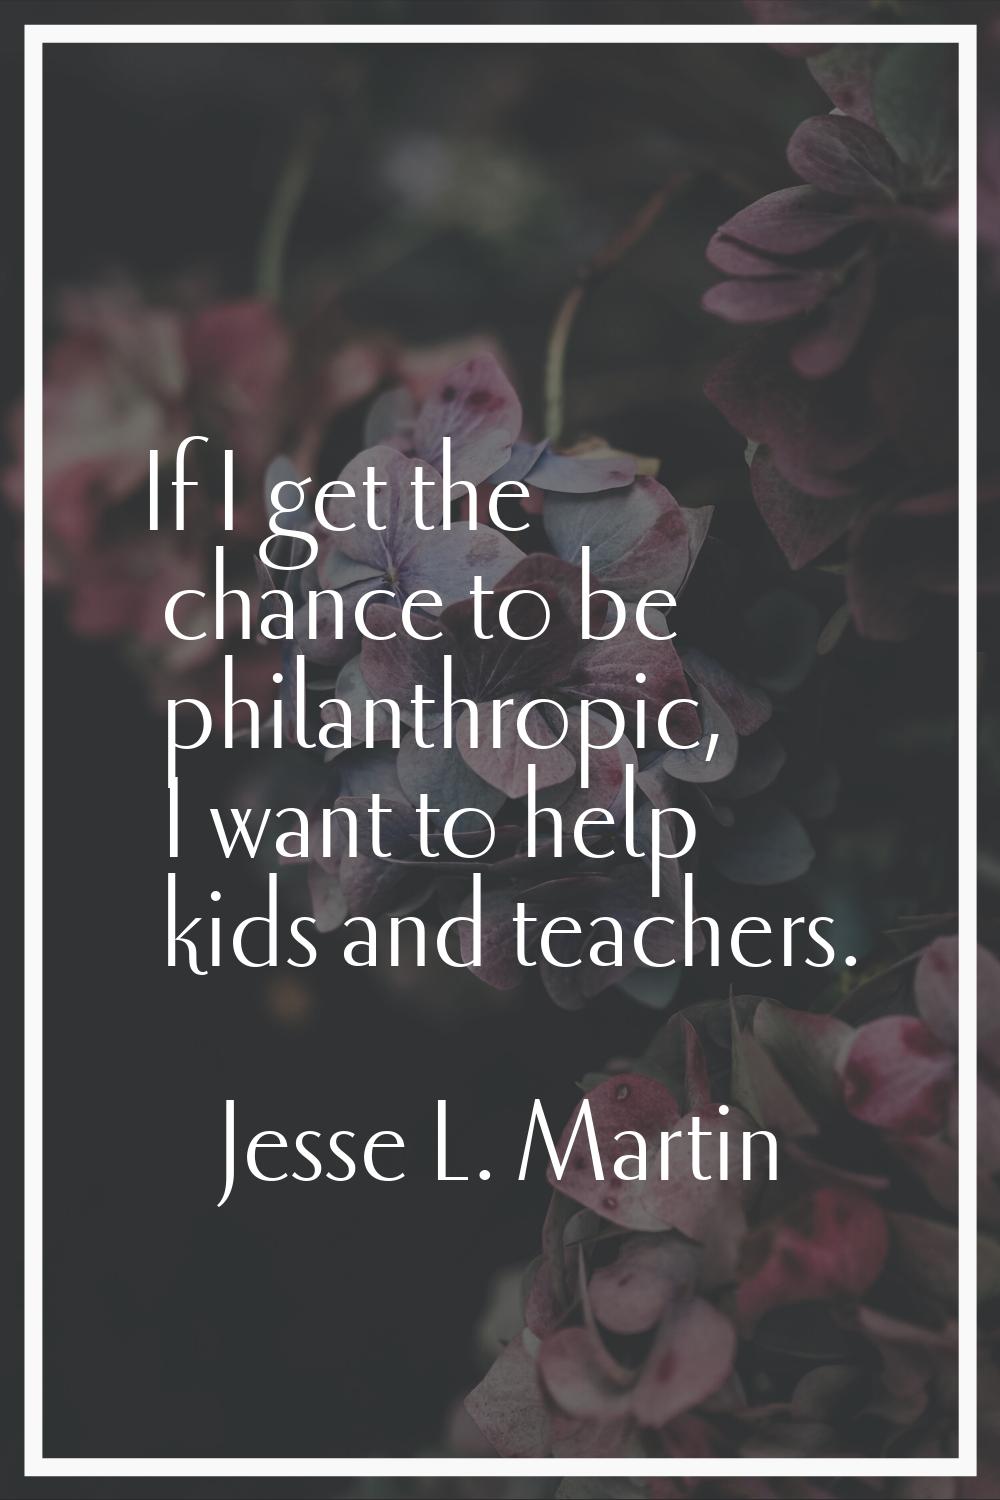 If I get the chance to be philanthropic, I want to help kids and teachers.